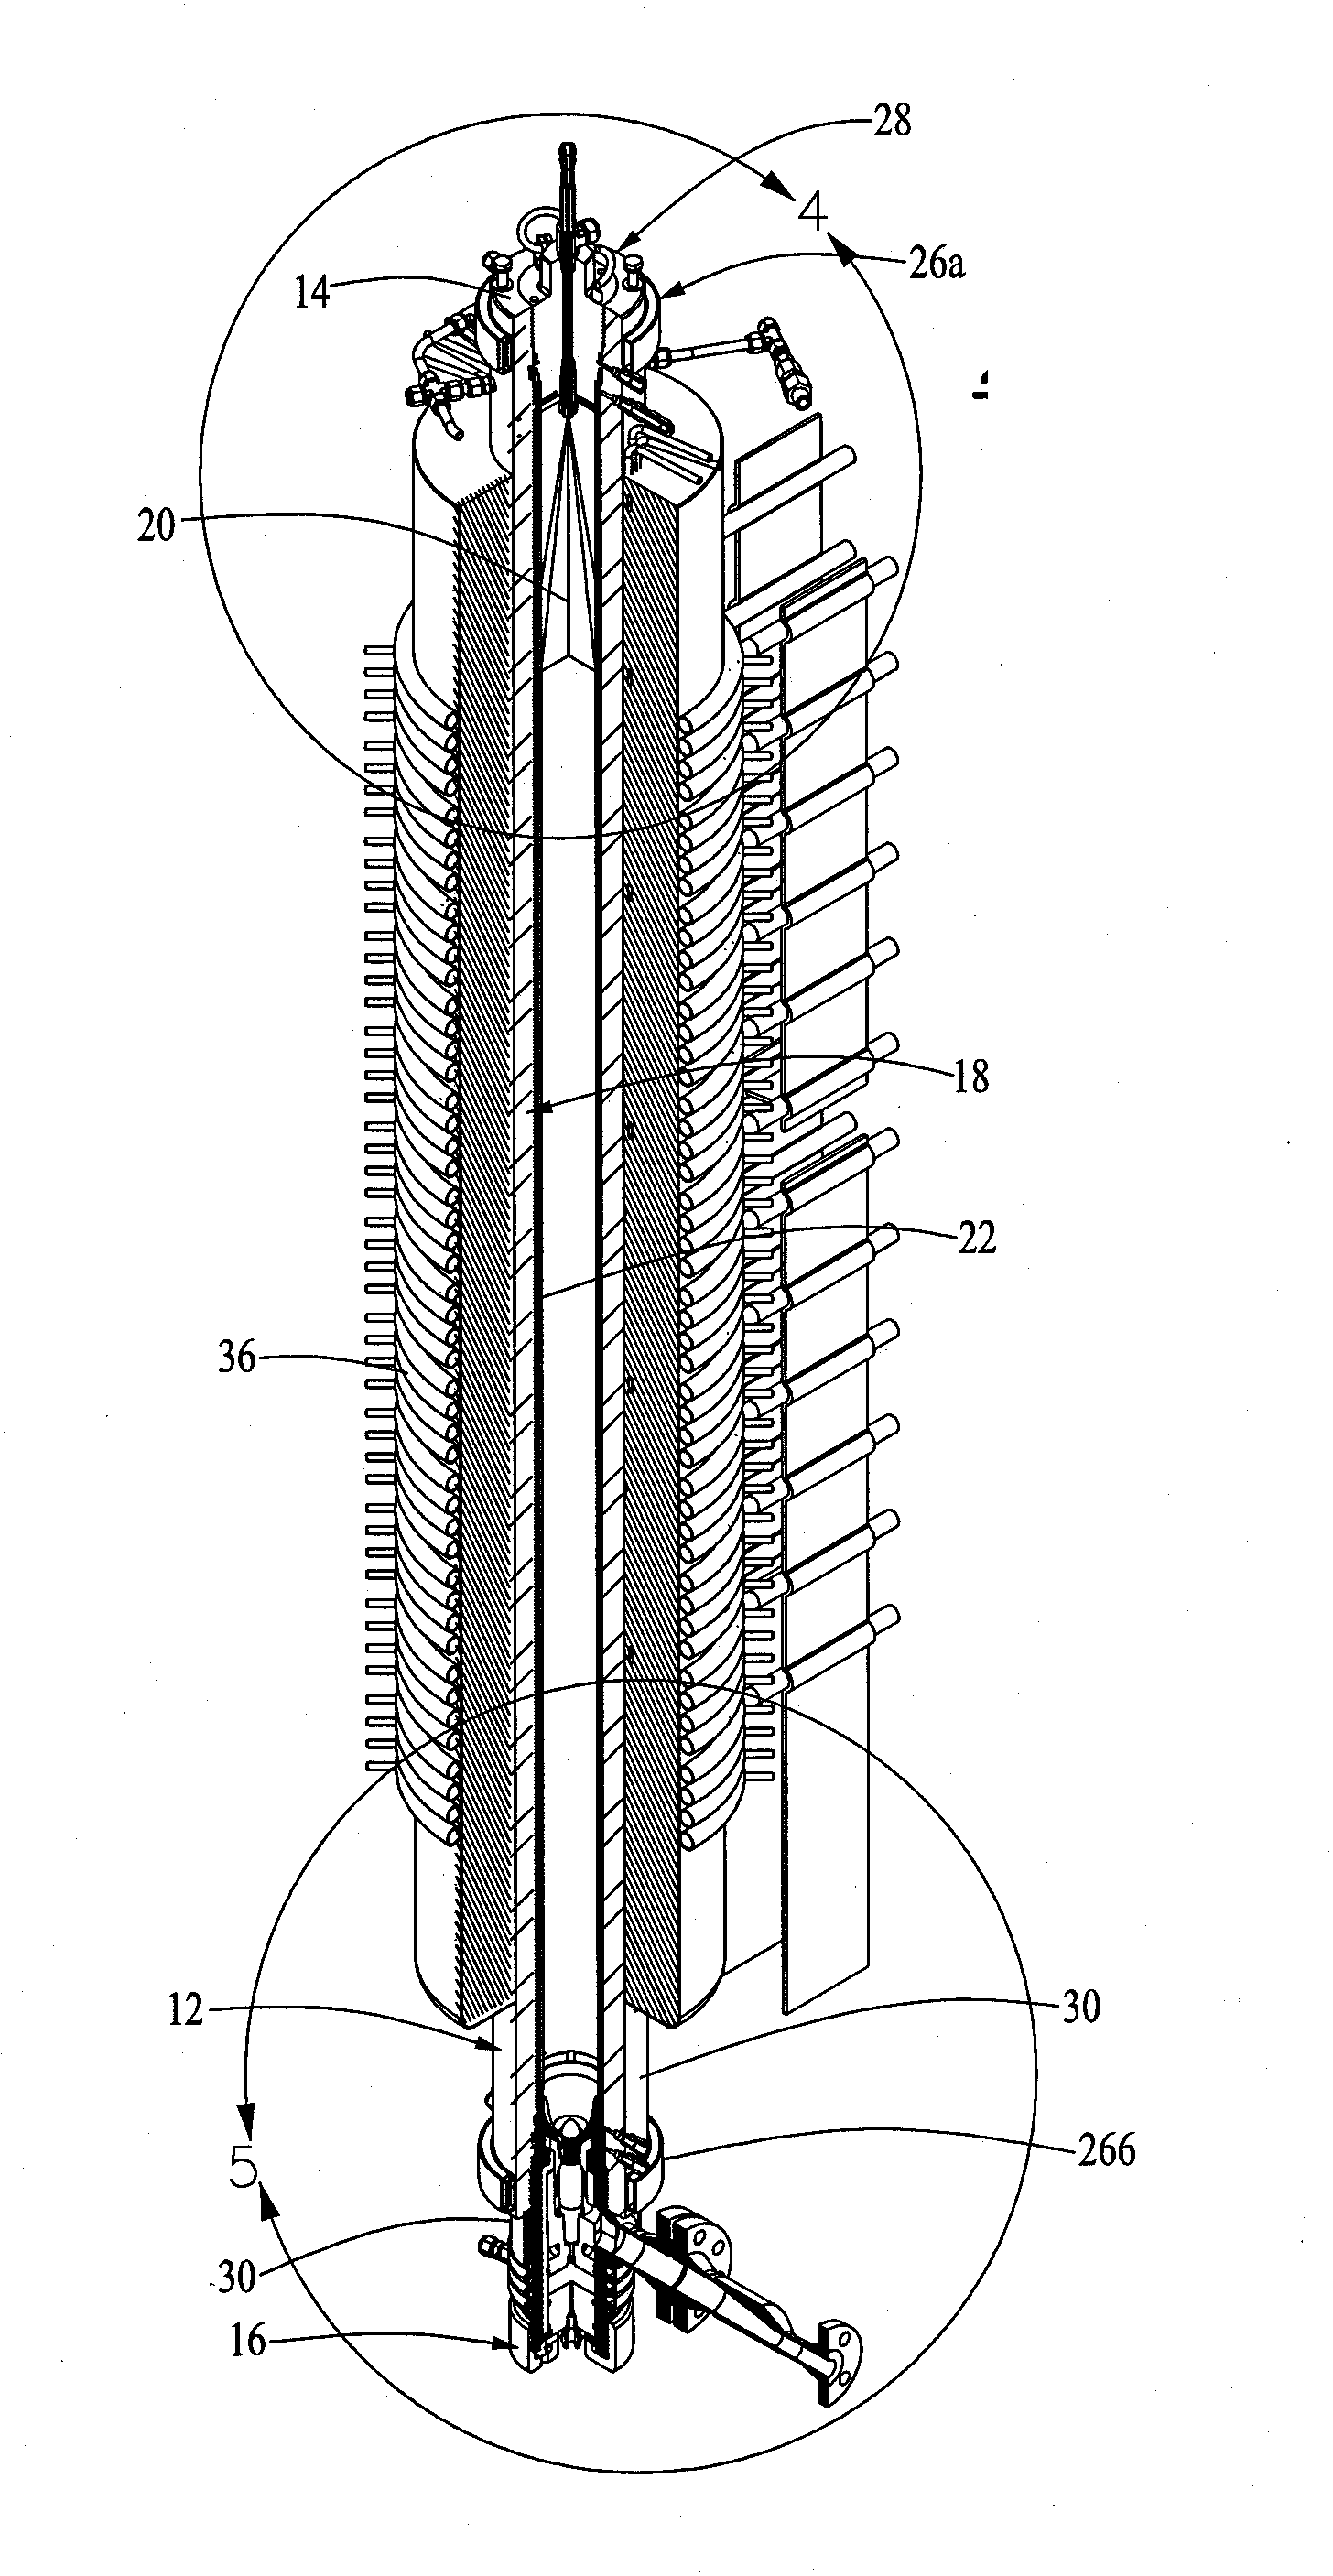 Supercritical water oxidation apparatus and process